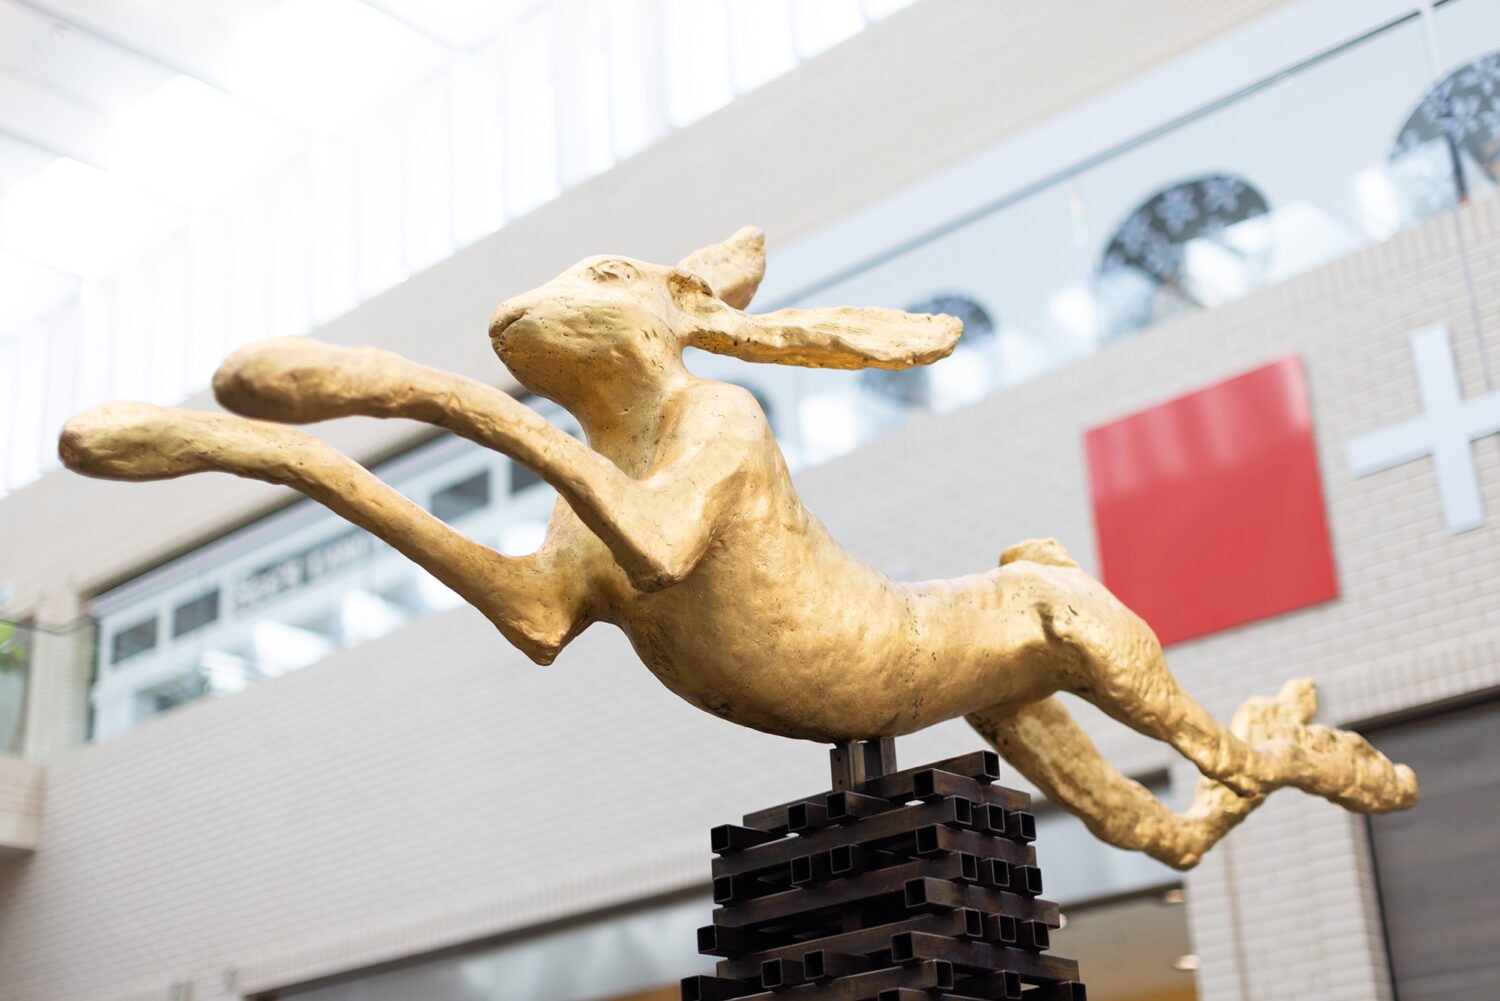 Photography by Nancy A. Nasher and David J. Haemisegger Collection. Large Leaping Hare, 1982, at NorthPark Center, Dallas, TX